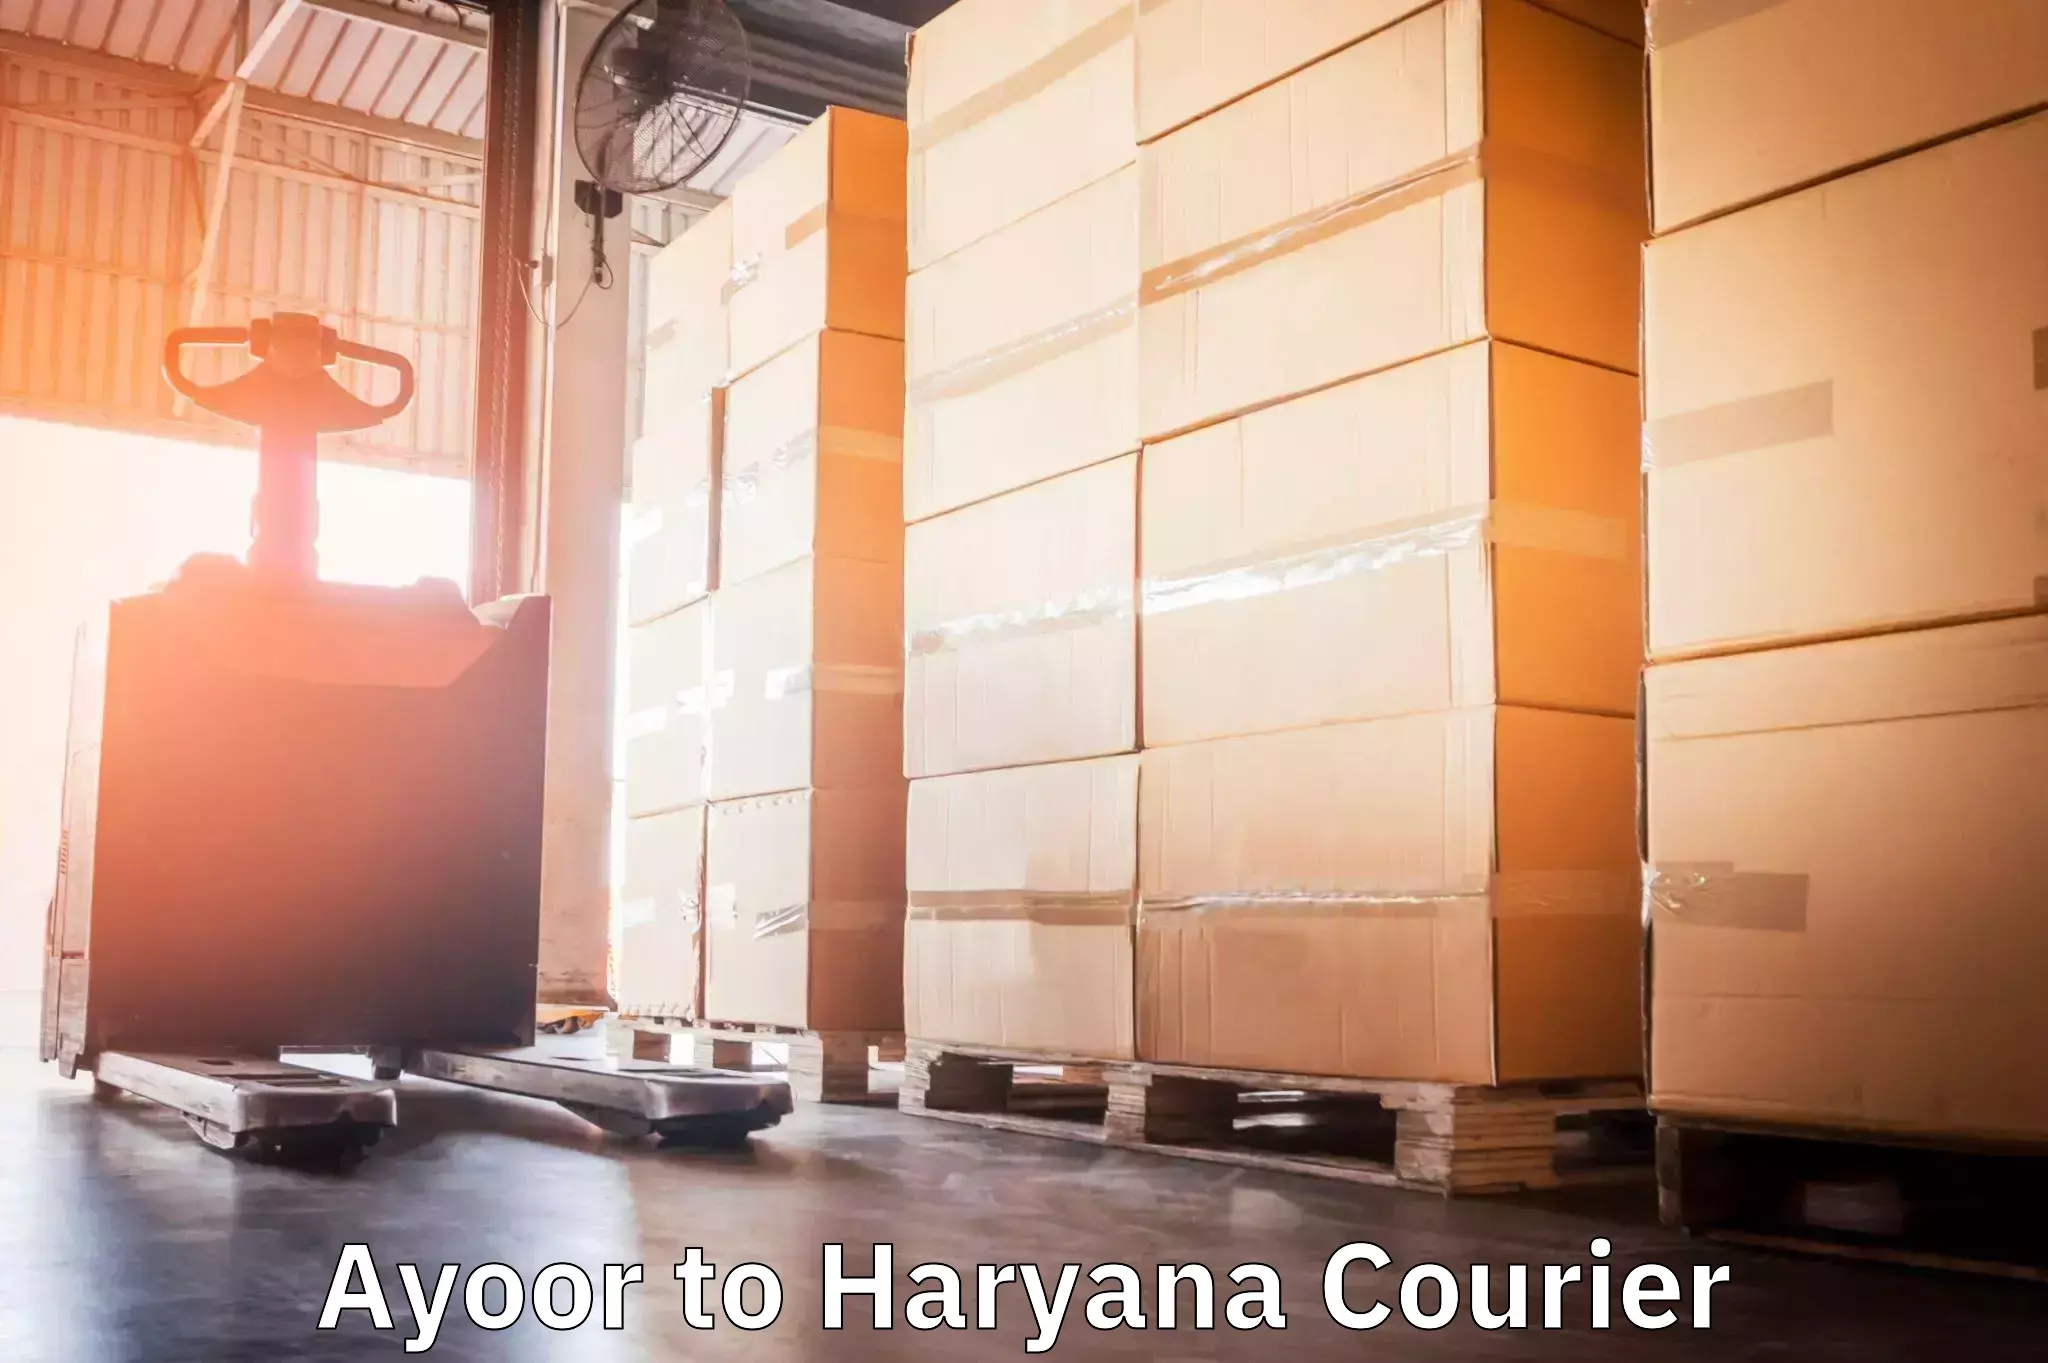 On-call courier service Ayoor to Faridabad